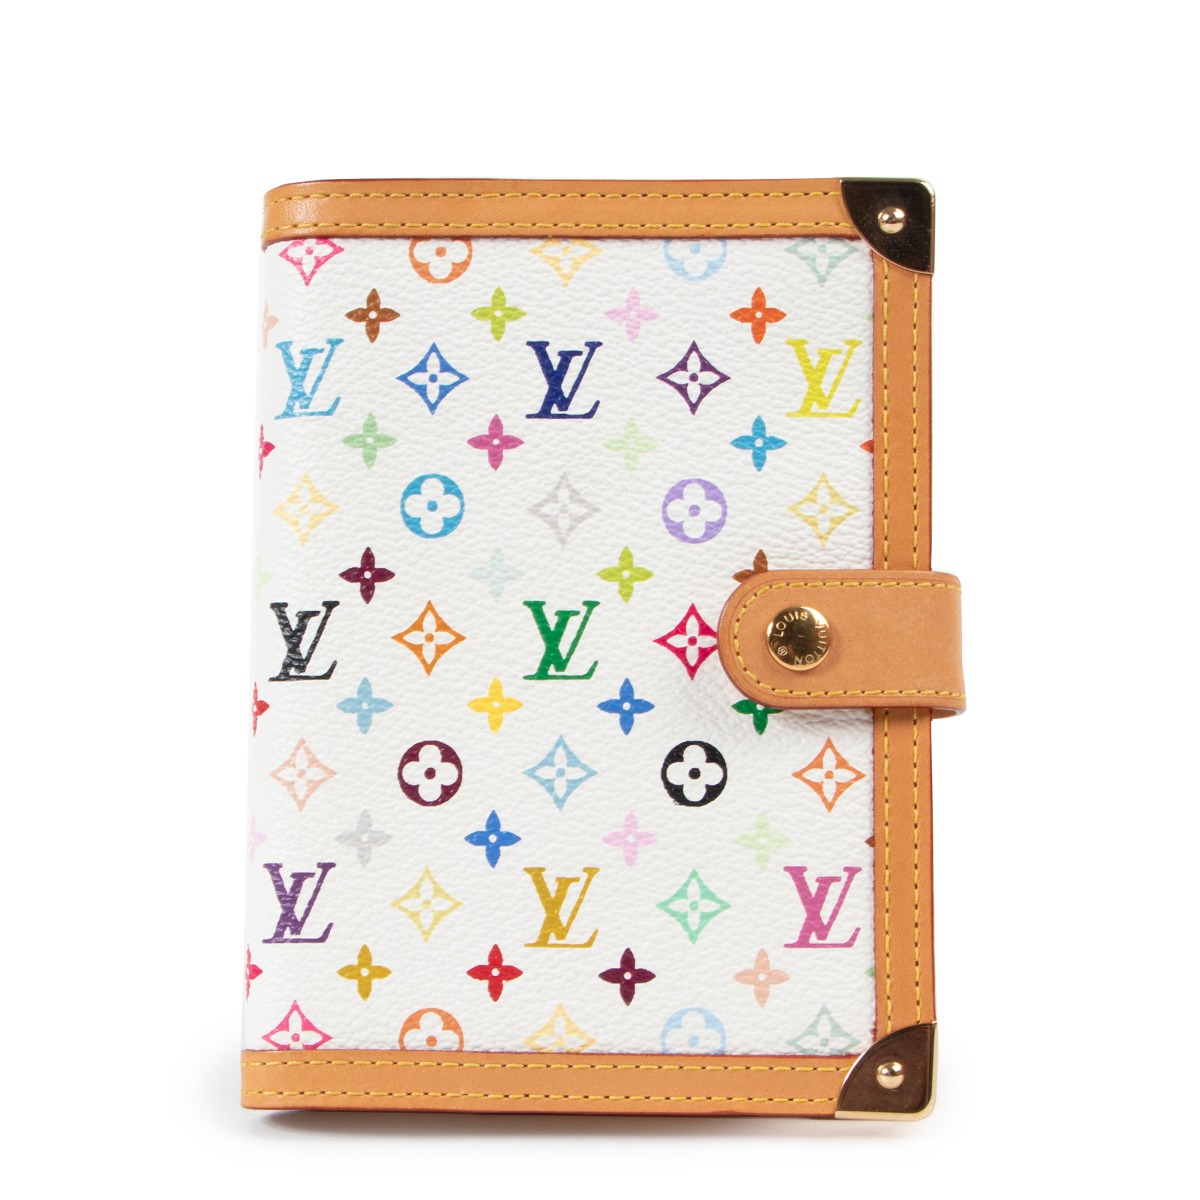 FOR SALE: Louis Vuitton x Takashi Murakami Monogram Agenda The most  valuable luxury goods brand in the world. Louis Vuitton was founded…